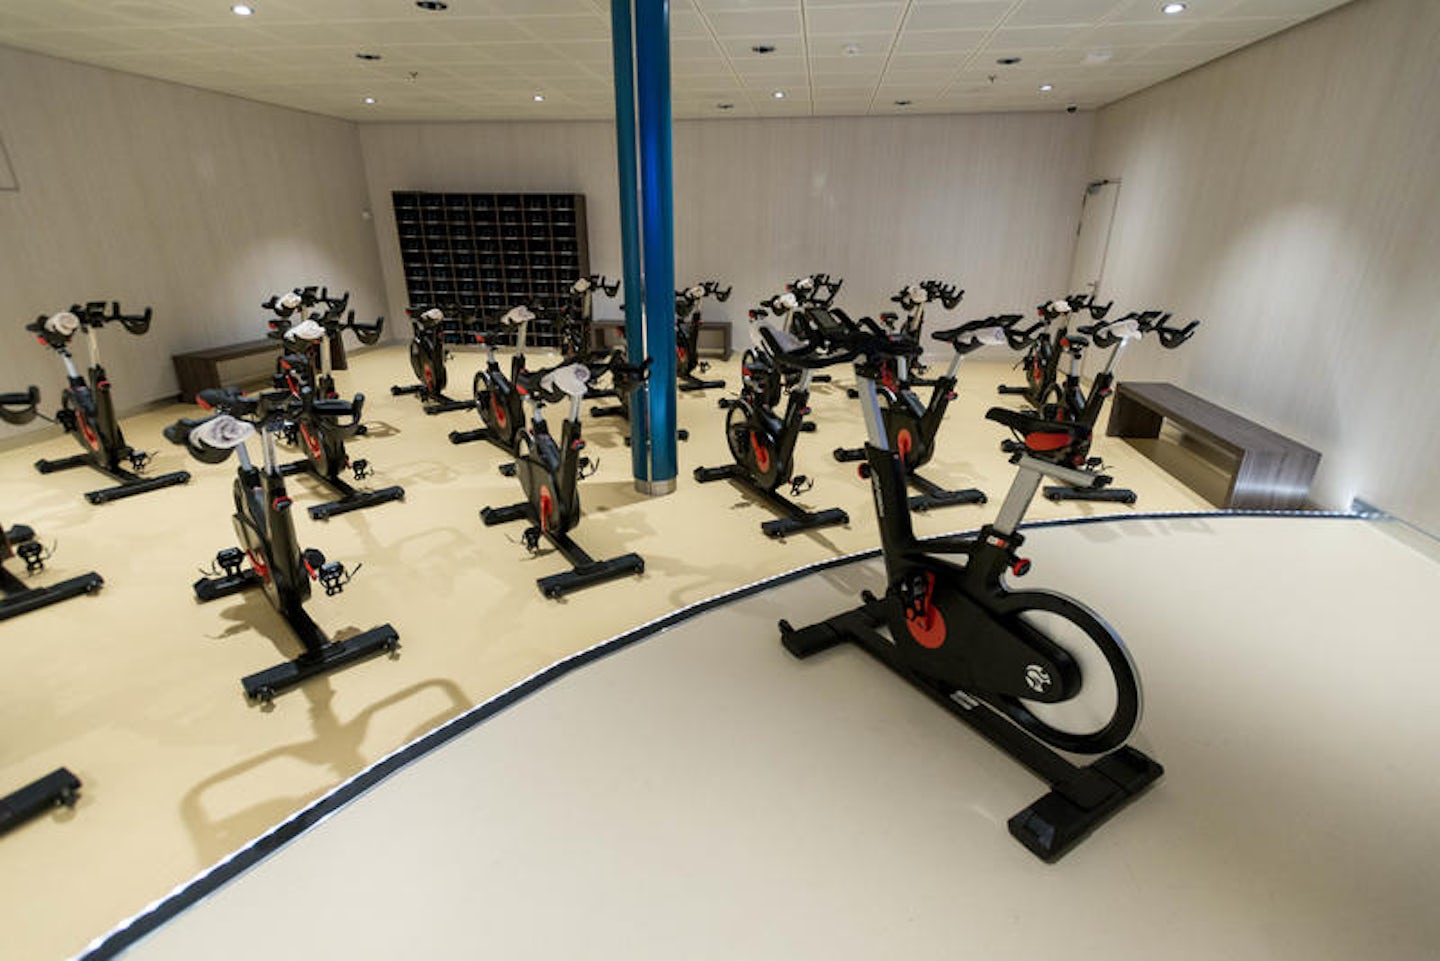 Fitness Center on Symphony of the Seas